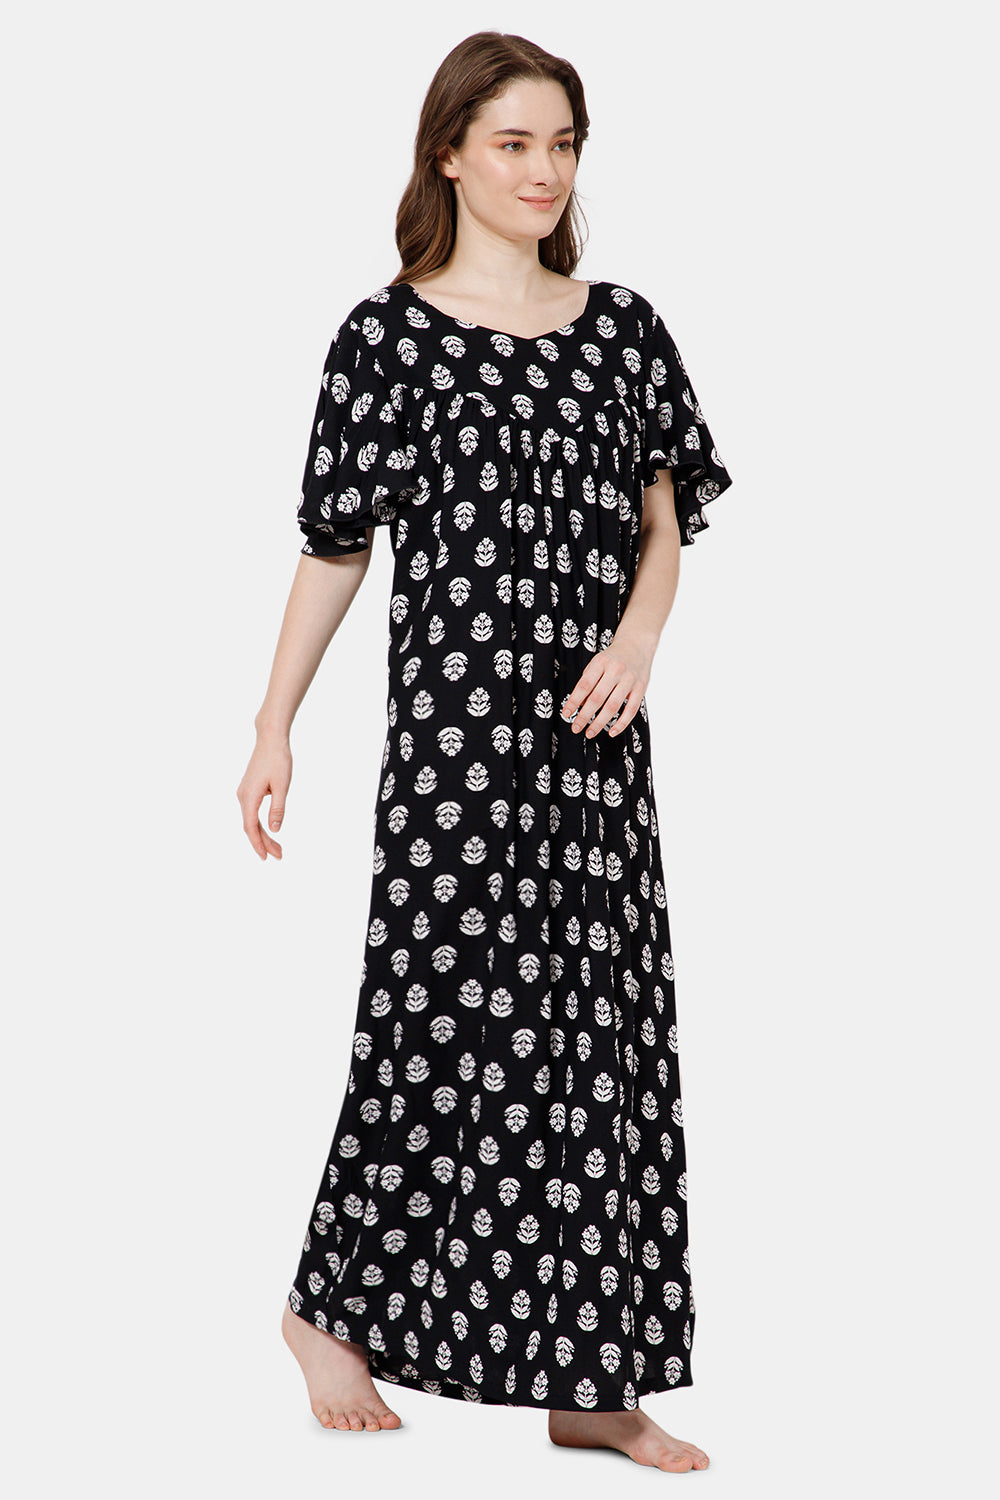 Naidu Hall All Over Printed Nighty with Butterfly Sleeves Diamond Neck - Black print-1 - NT37